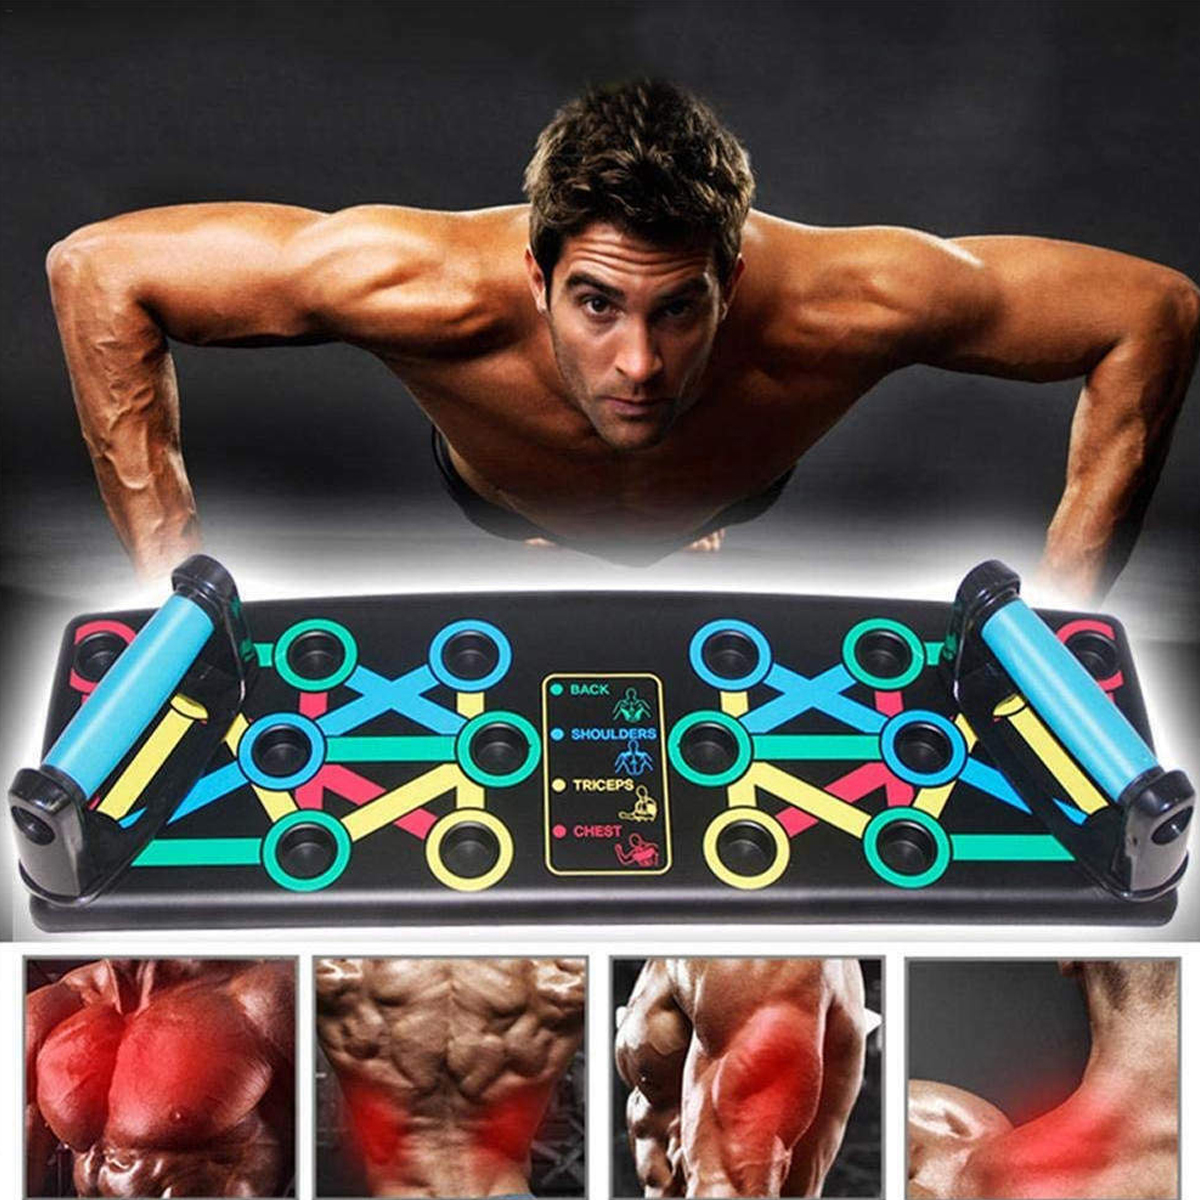 14-In-1-Foldable-Push-Up-Stand-Board-Home-Gym-Push-up-Chest-Muscle-Training-Fitness-Equipment-1667691-2